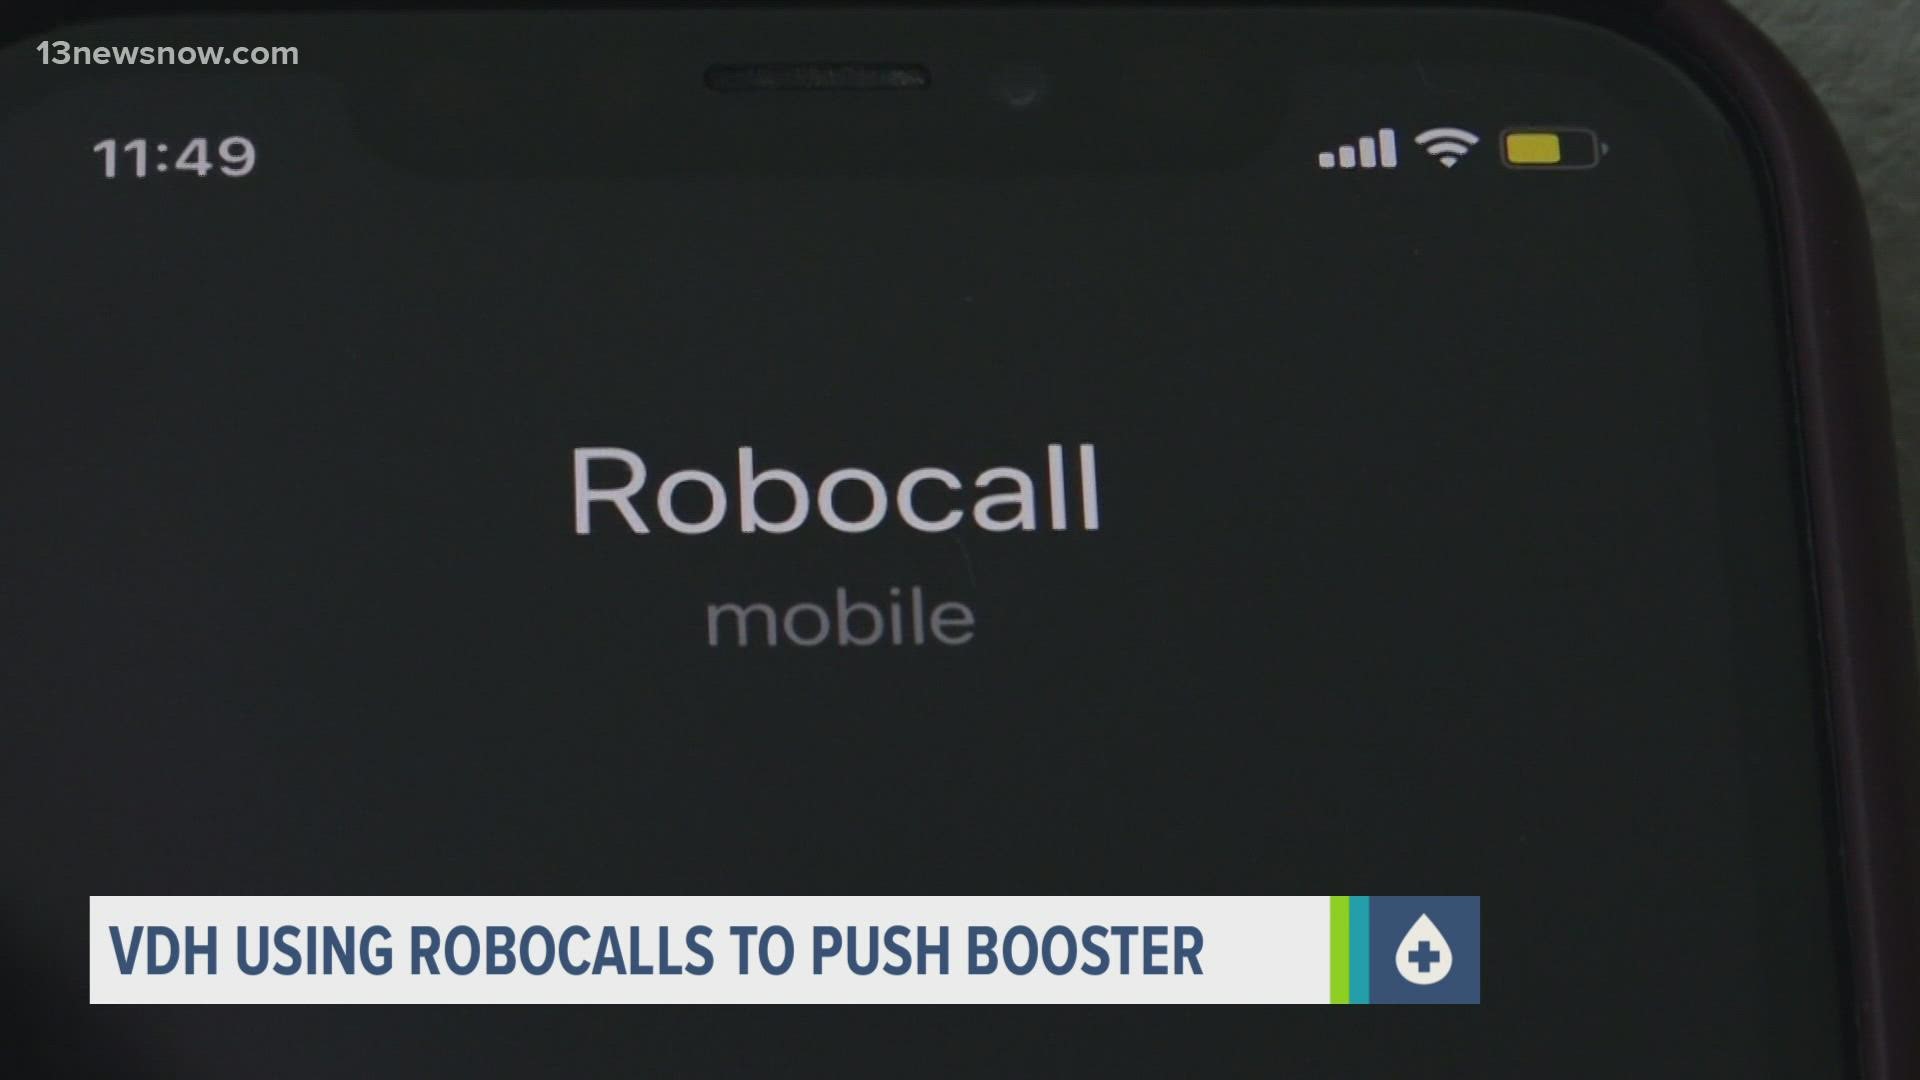 Virginia Department of Health officials say they are planning to send out robocalls to Hampton Roads residents overdue for their booster.